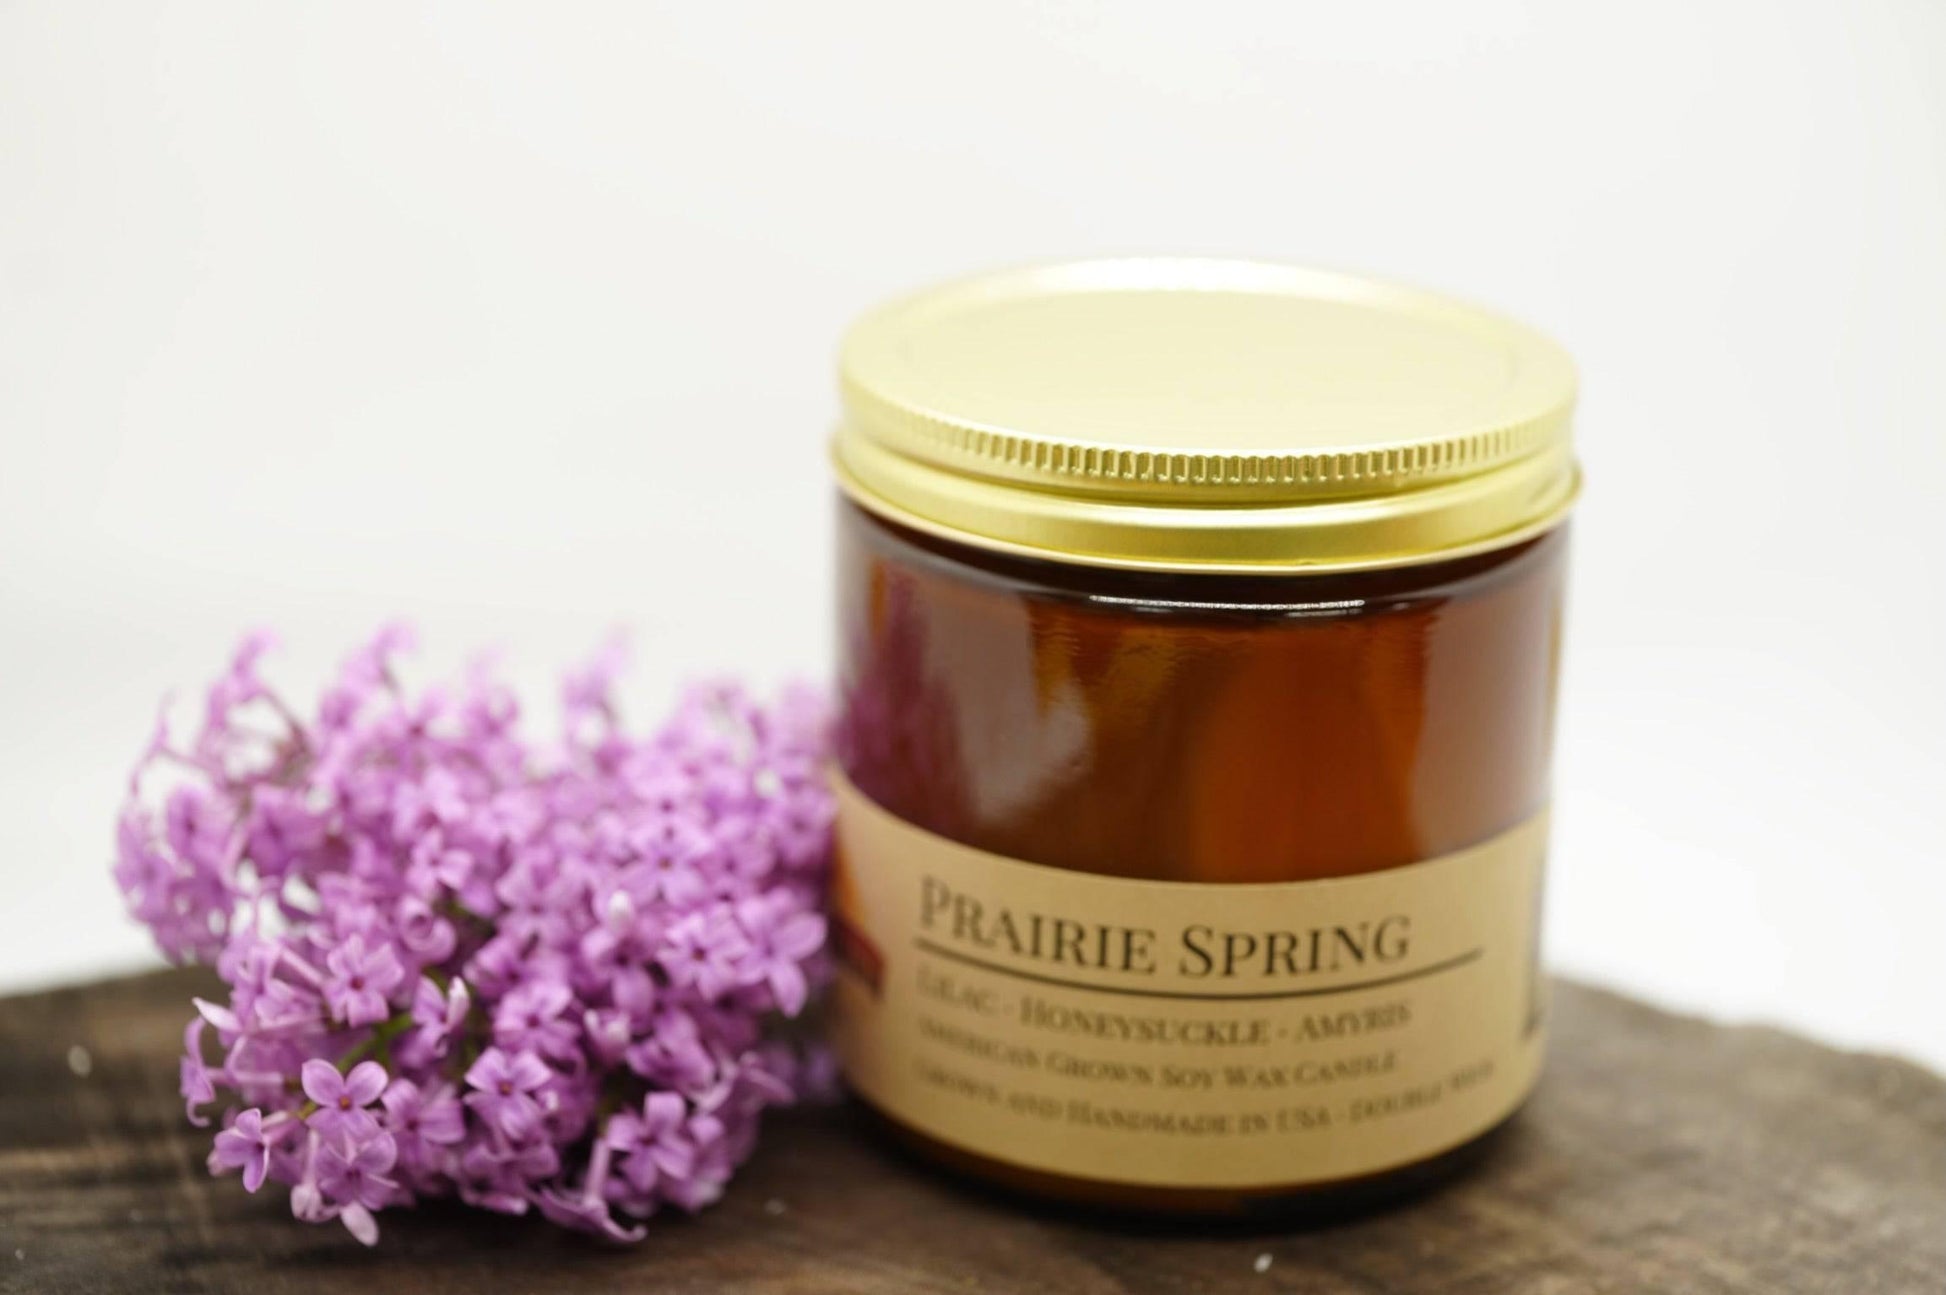 Prairie Spring Soy Wax Candle | 16 oz Double Wick Amber Apothecary Jar - Prairie Fire Candles